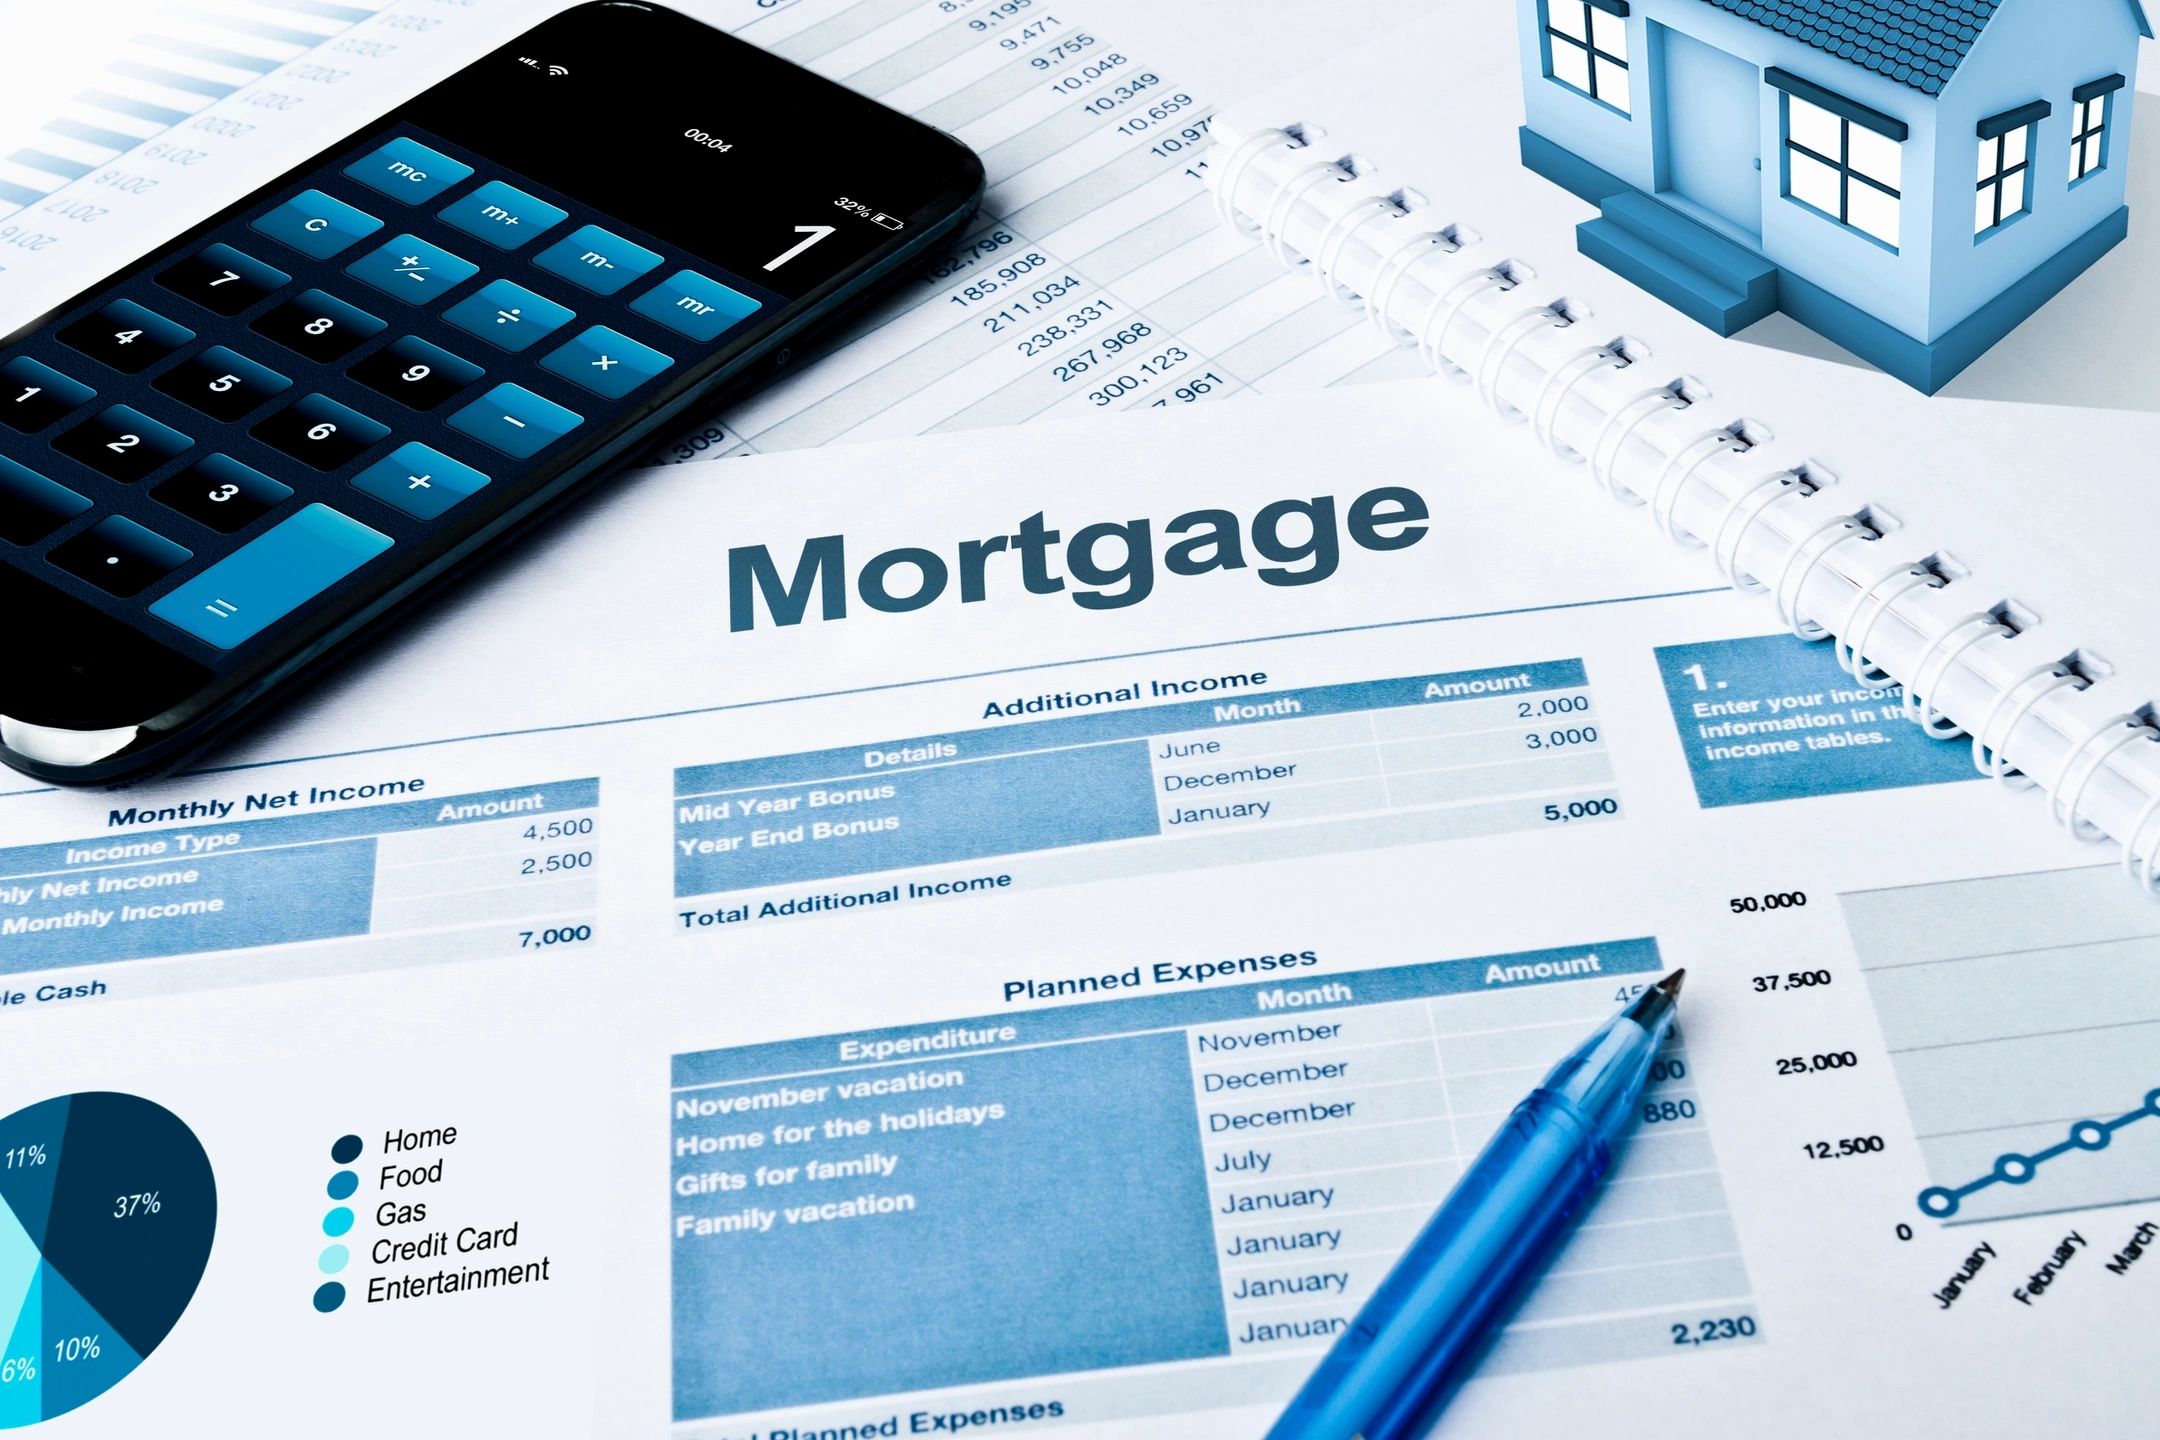 Generic Mortgage documents to help describe home insurance.